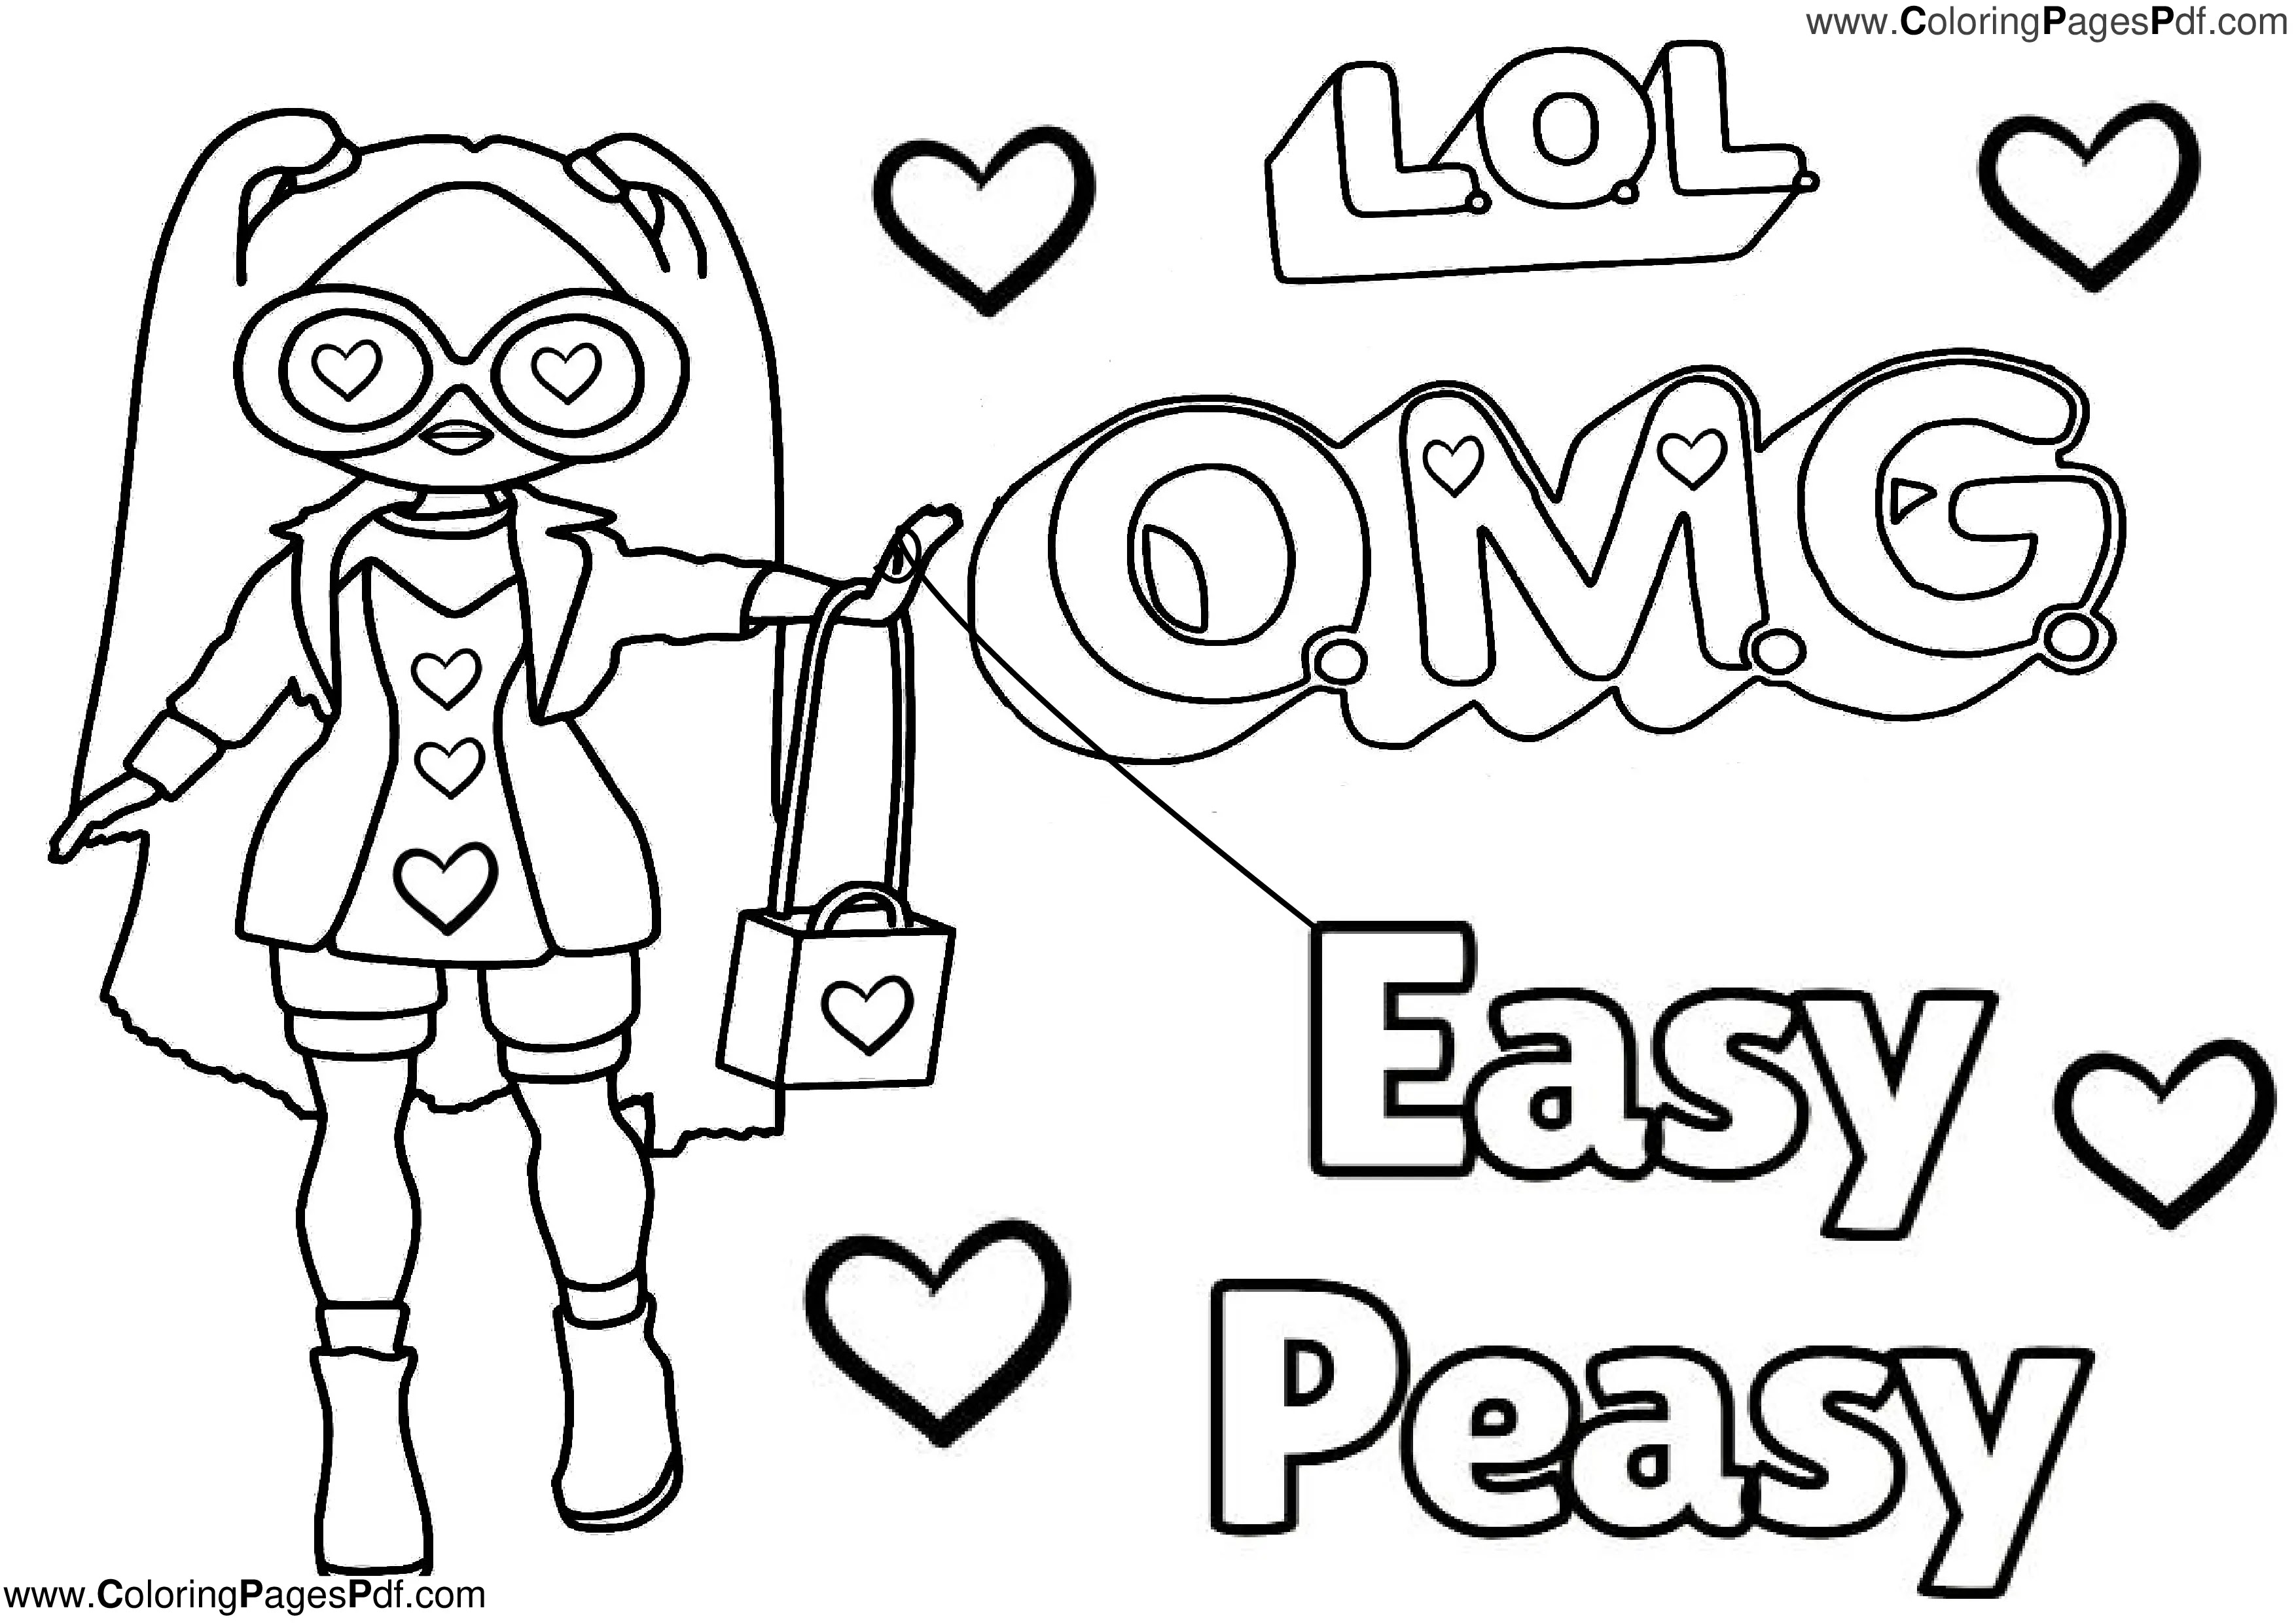 Lol omg coloring pages for kids